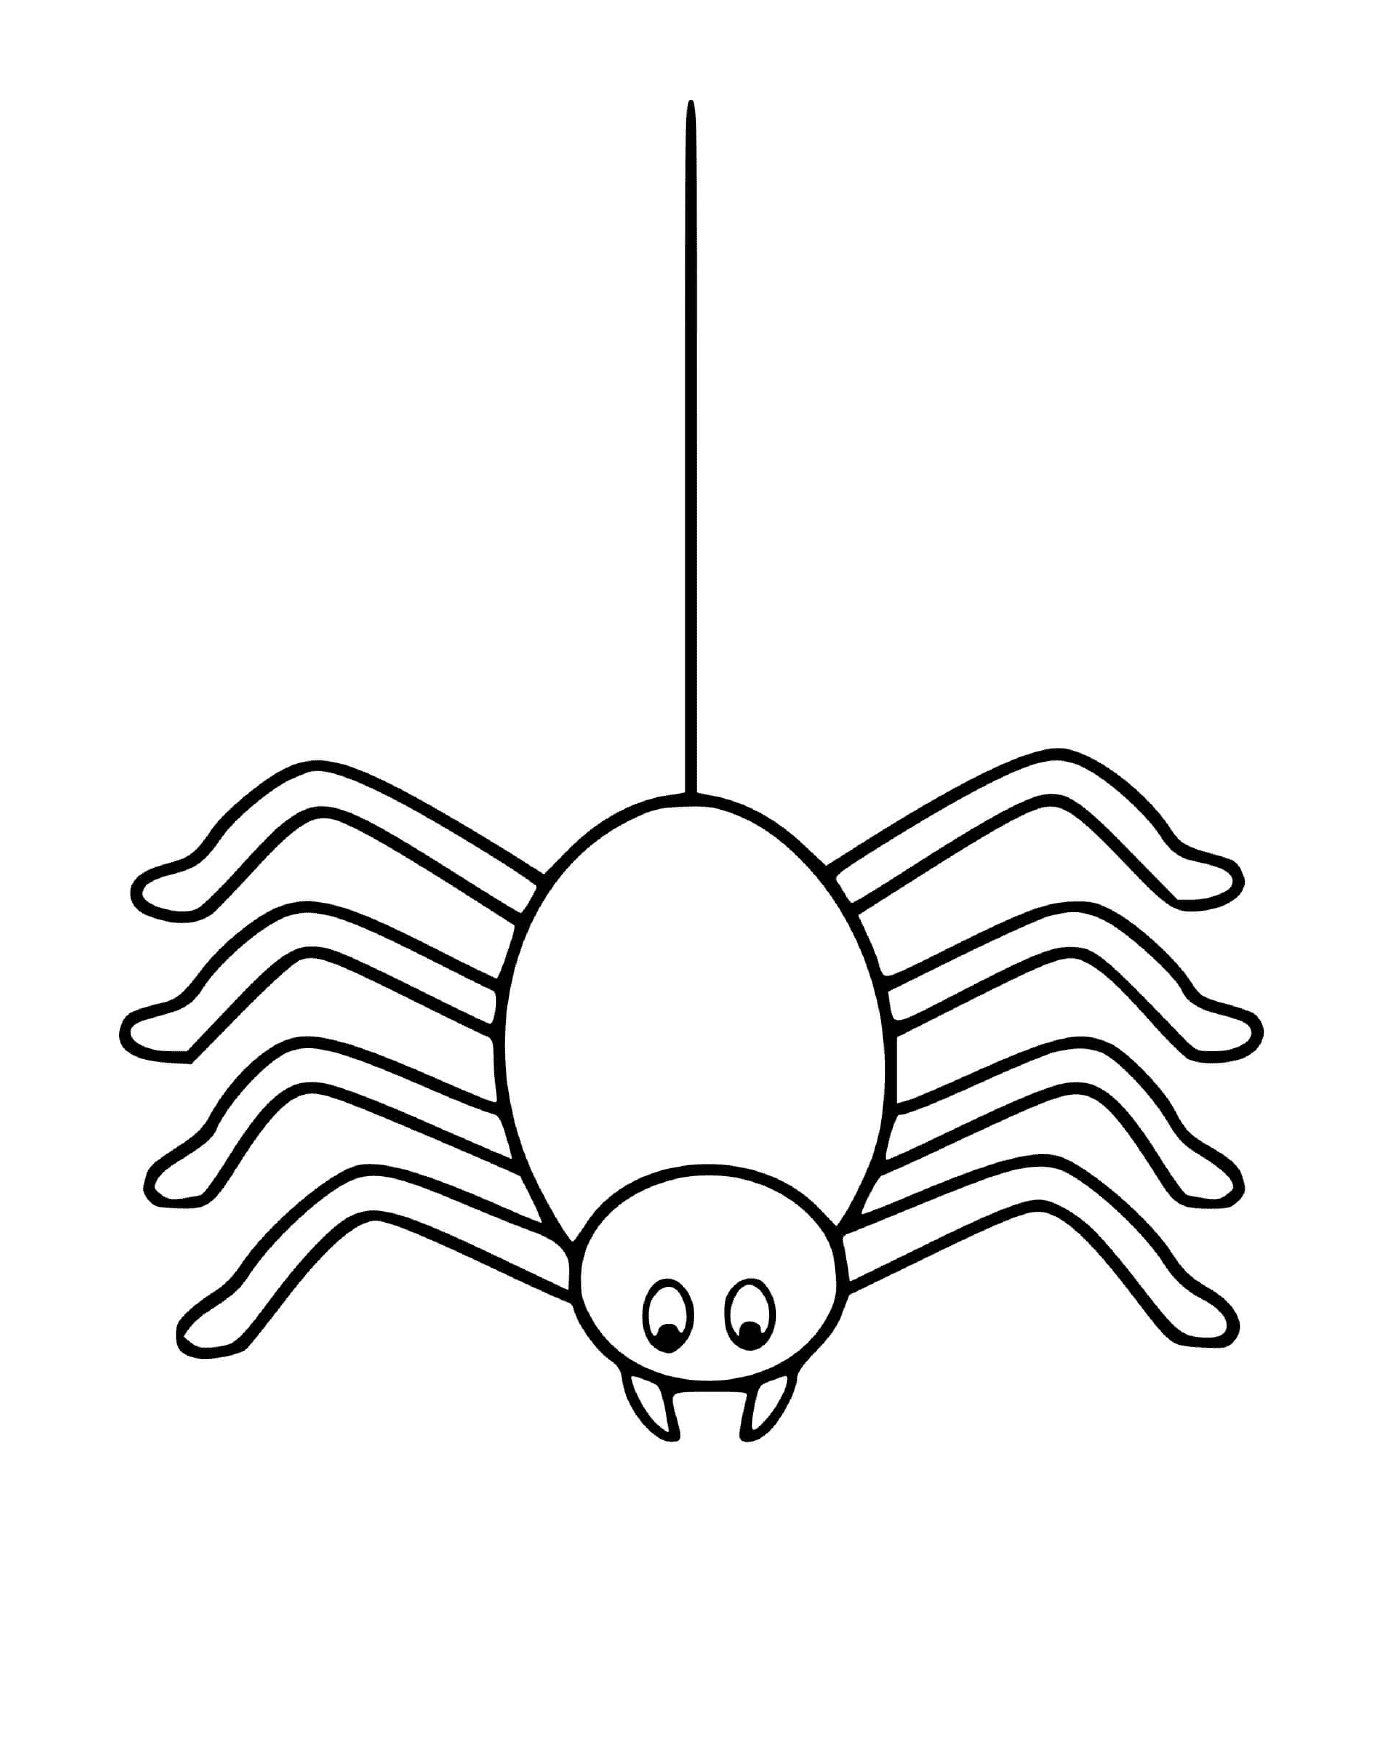  A spider coming down 